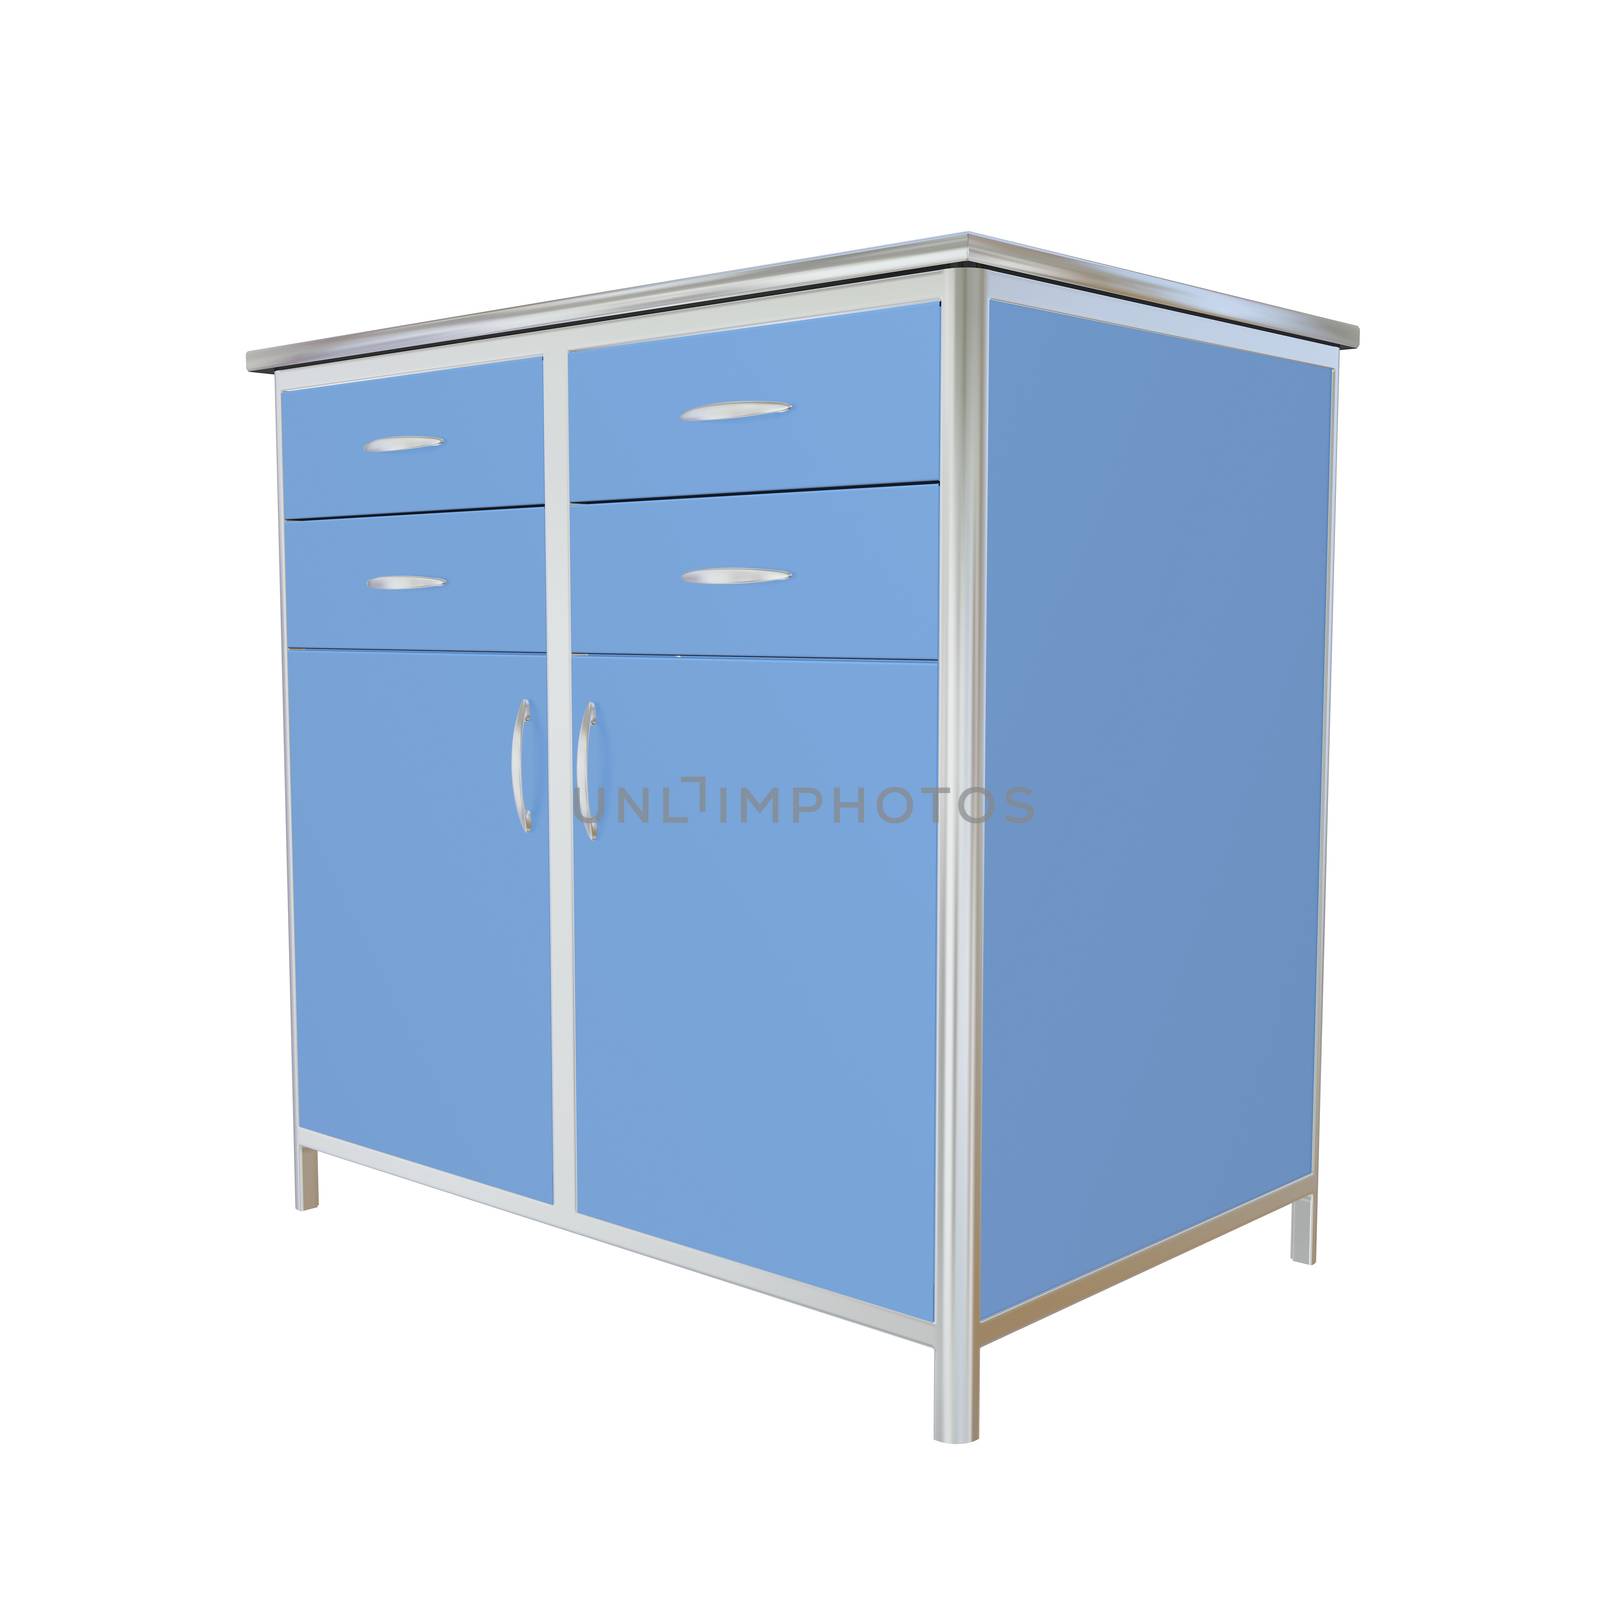 Blue and stainless steel metal medical supply cabinet, 3d illustration, isolated against a white background